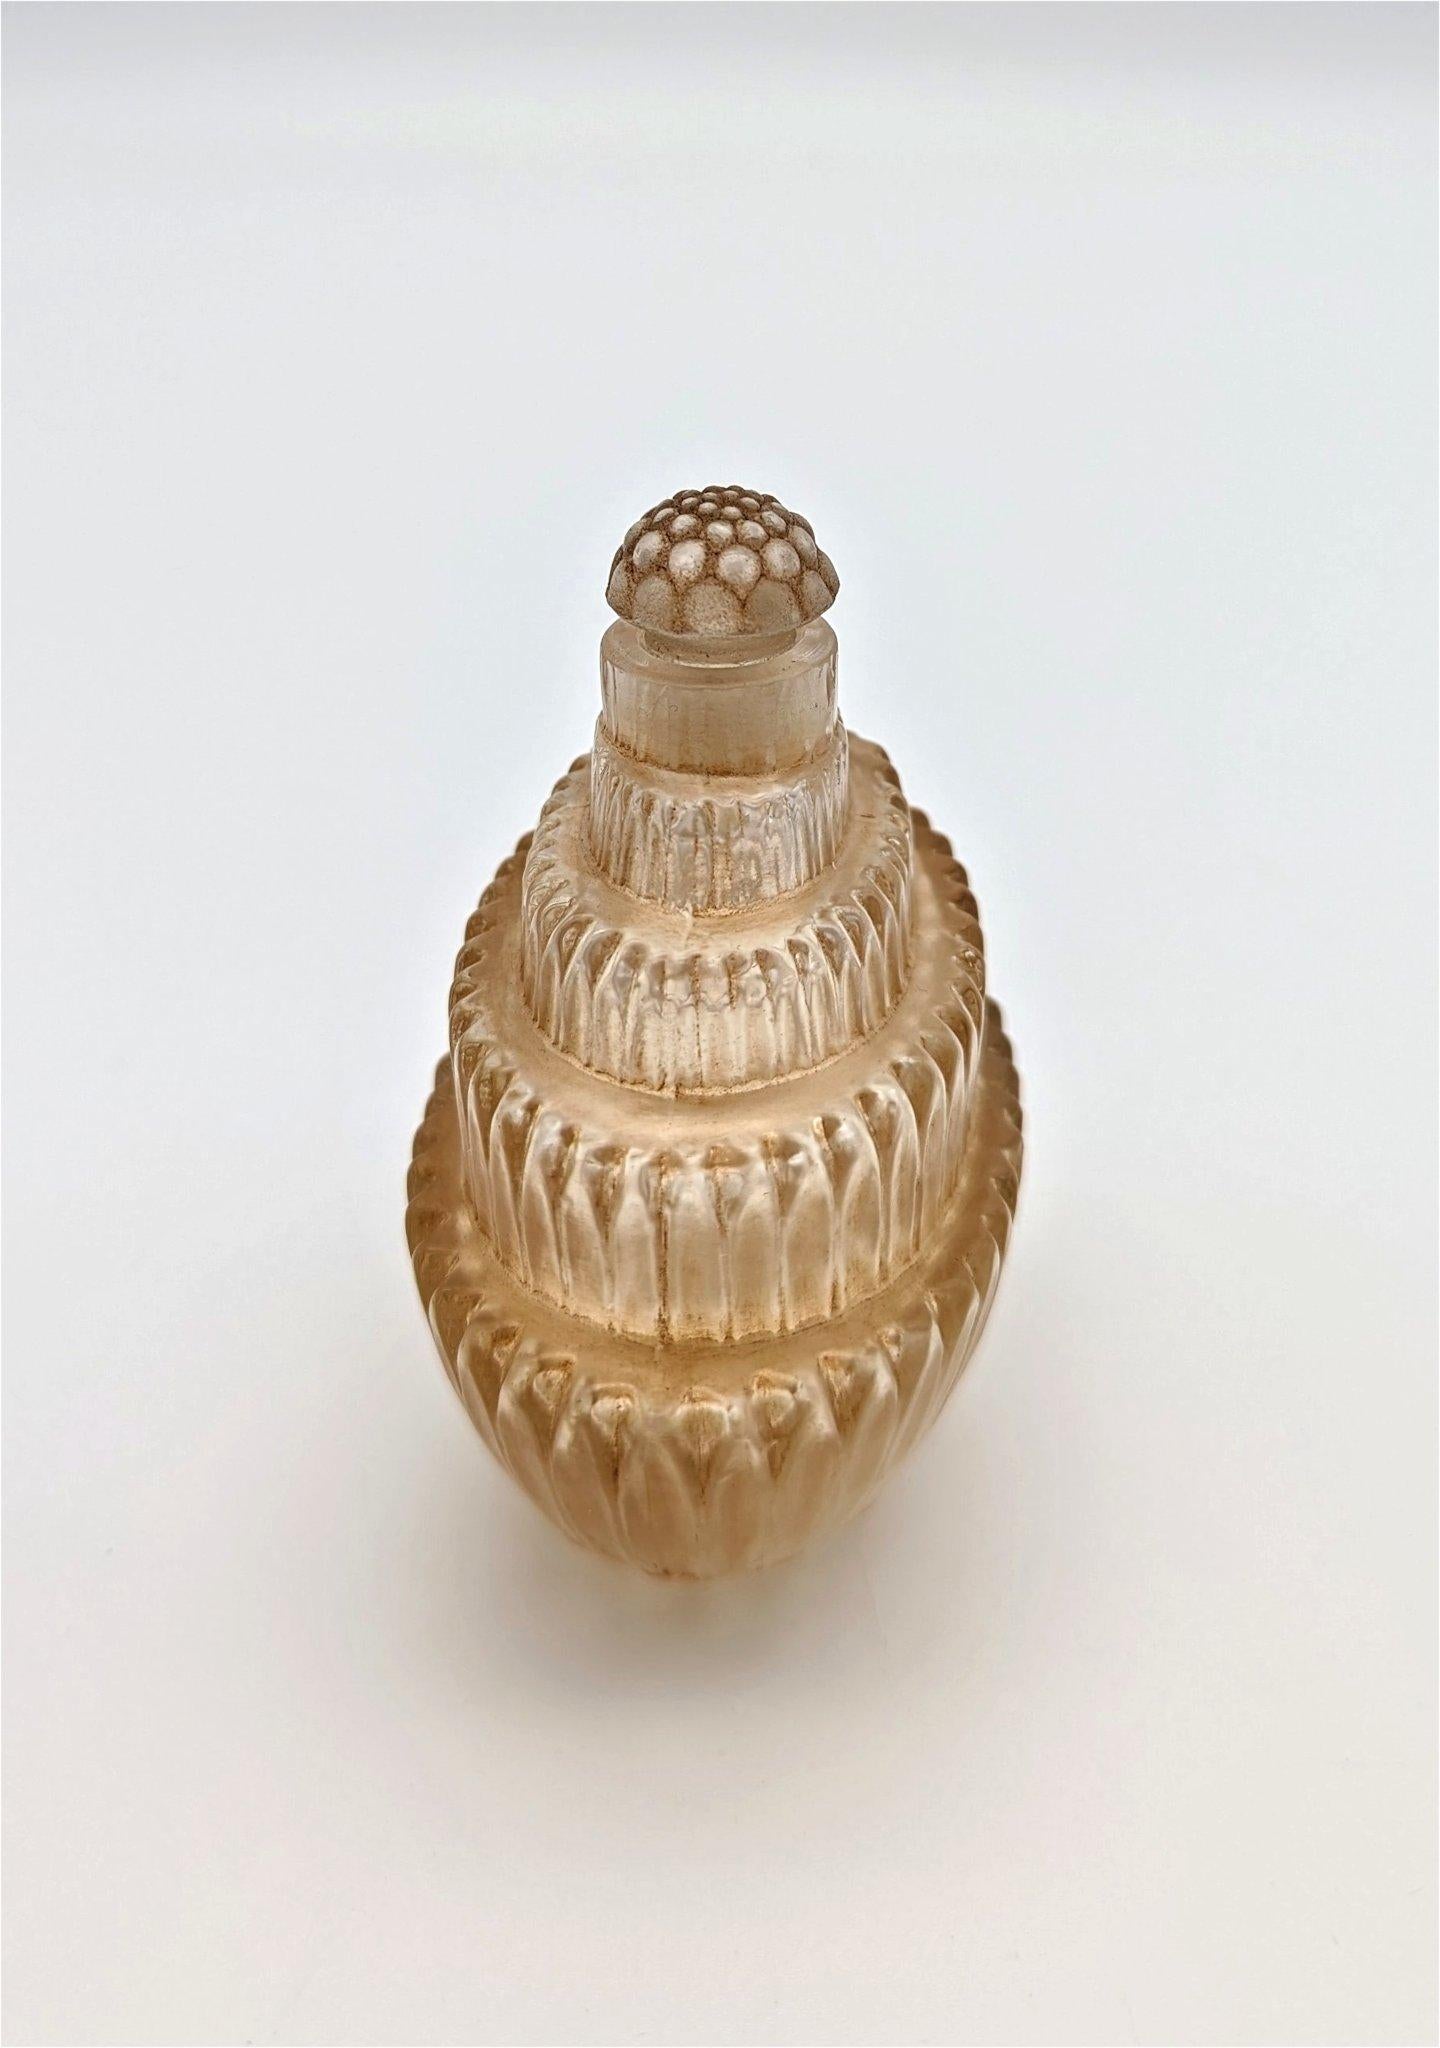 A good and early art deco perfume bottle designed by René Lalique in 1926 for the Maison Lalique titled 